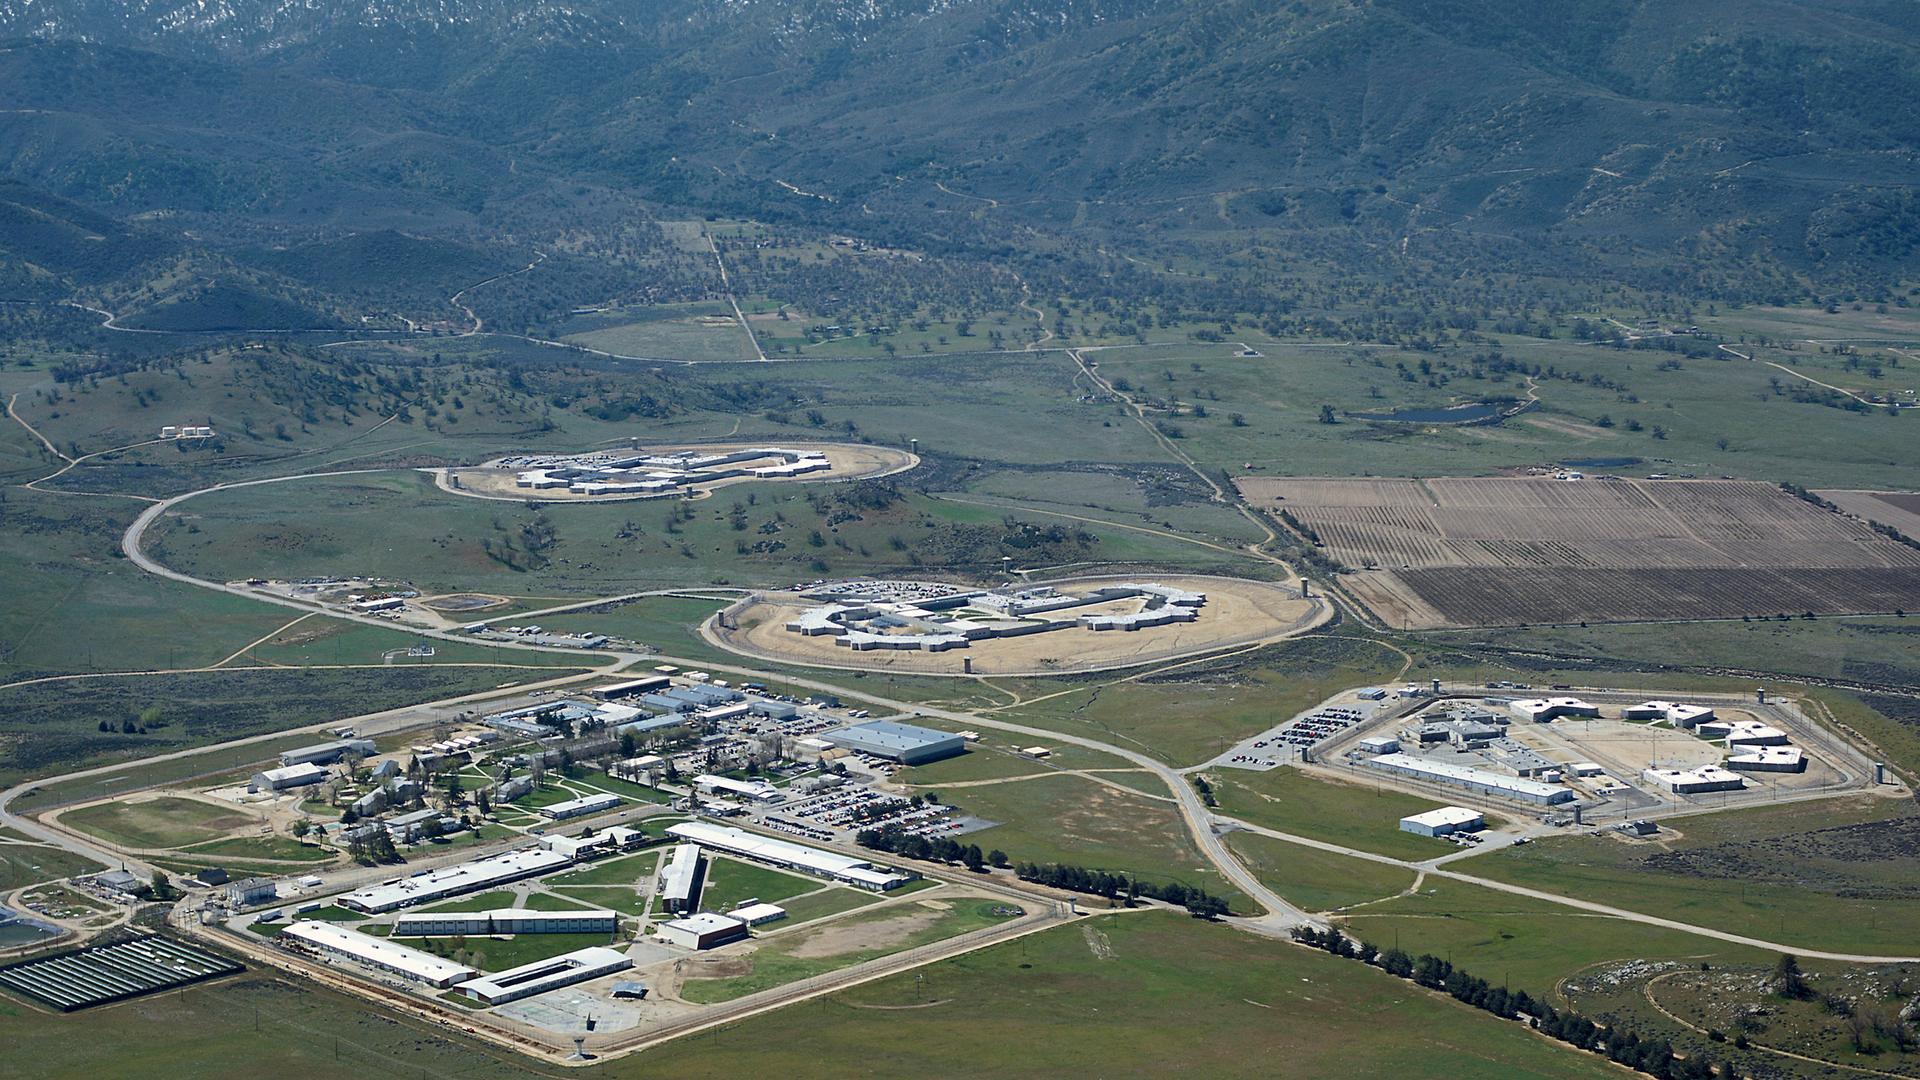 aerial photo of large complex in foothills